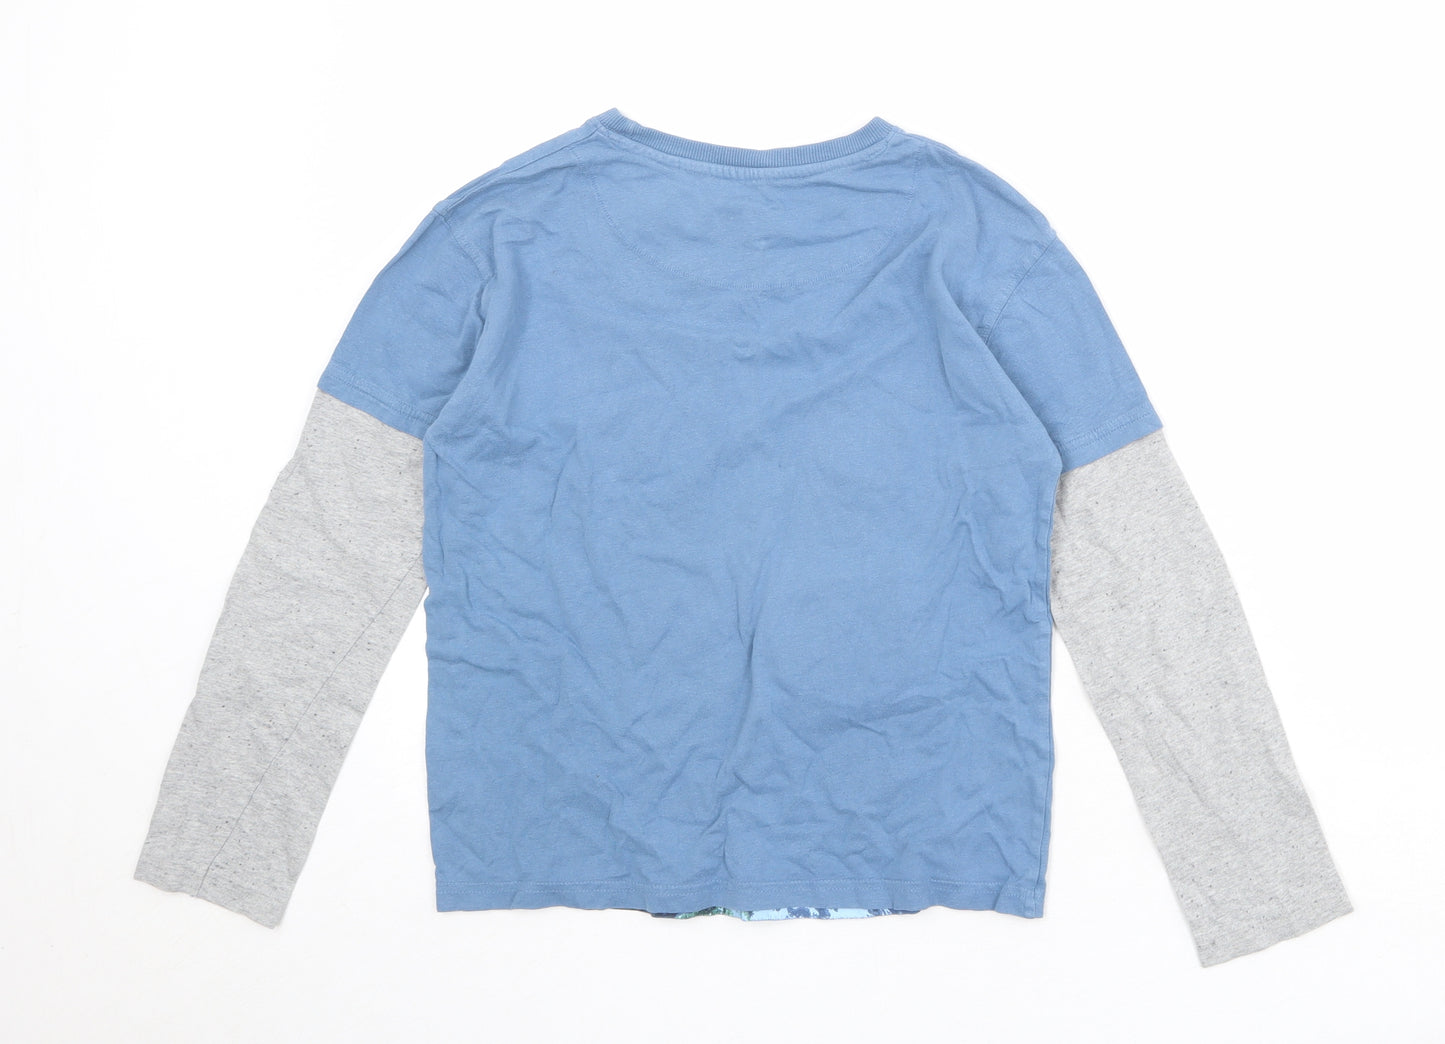 John Lewis Boys Blue 100% Cotton Basic T-Shirt Size 11 Years Round Neck Pullover - Planet